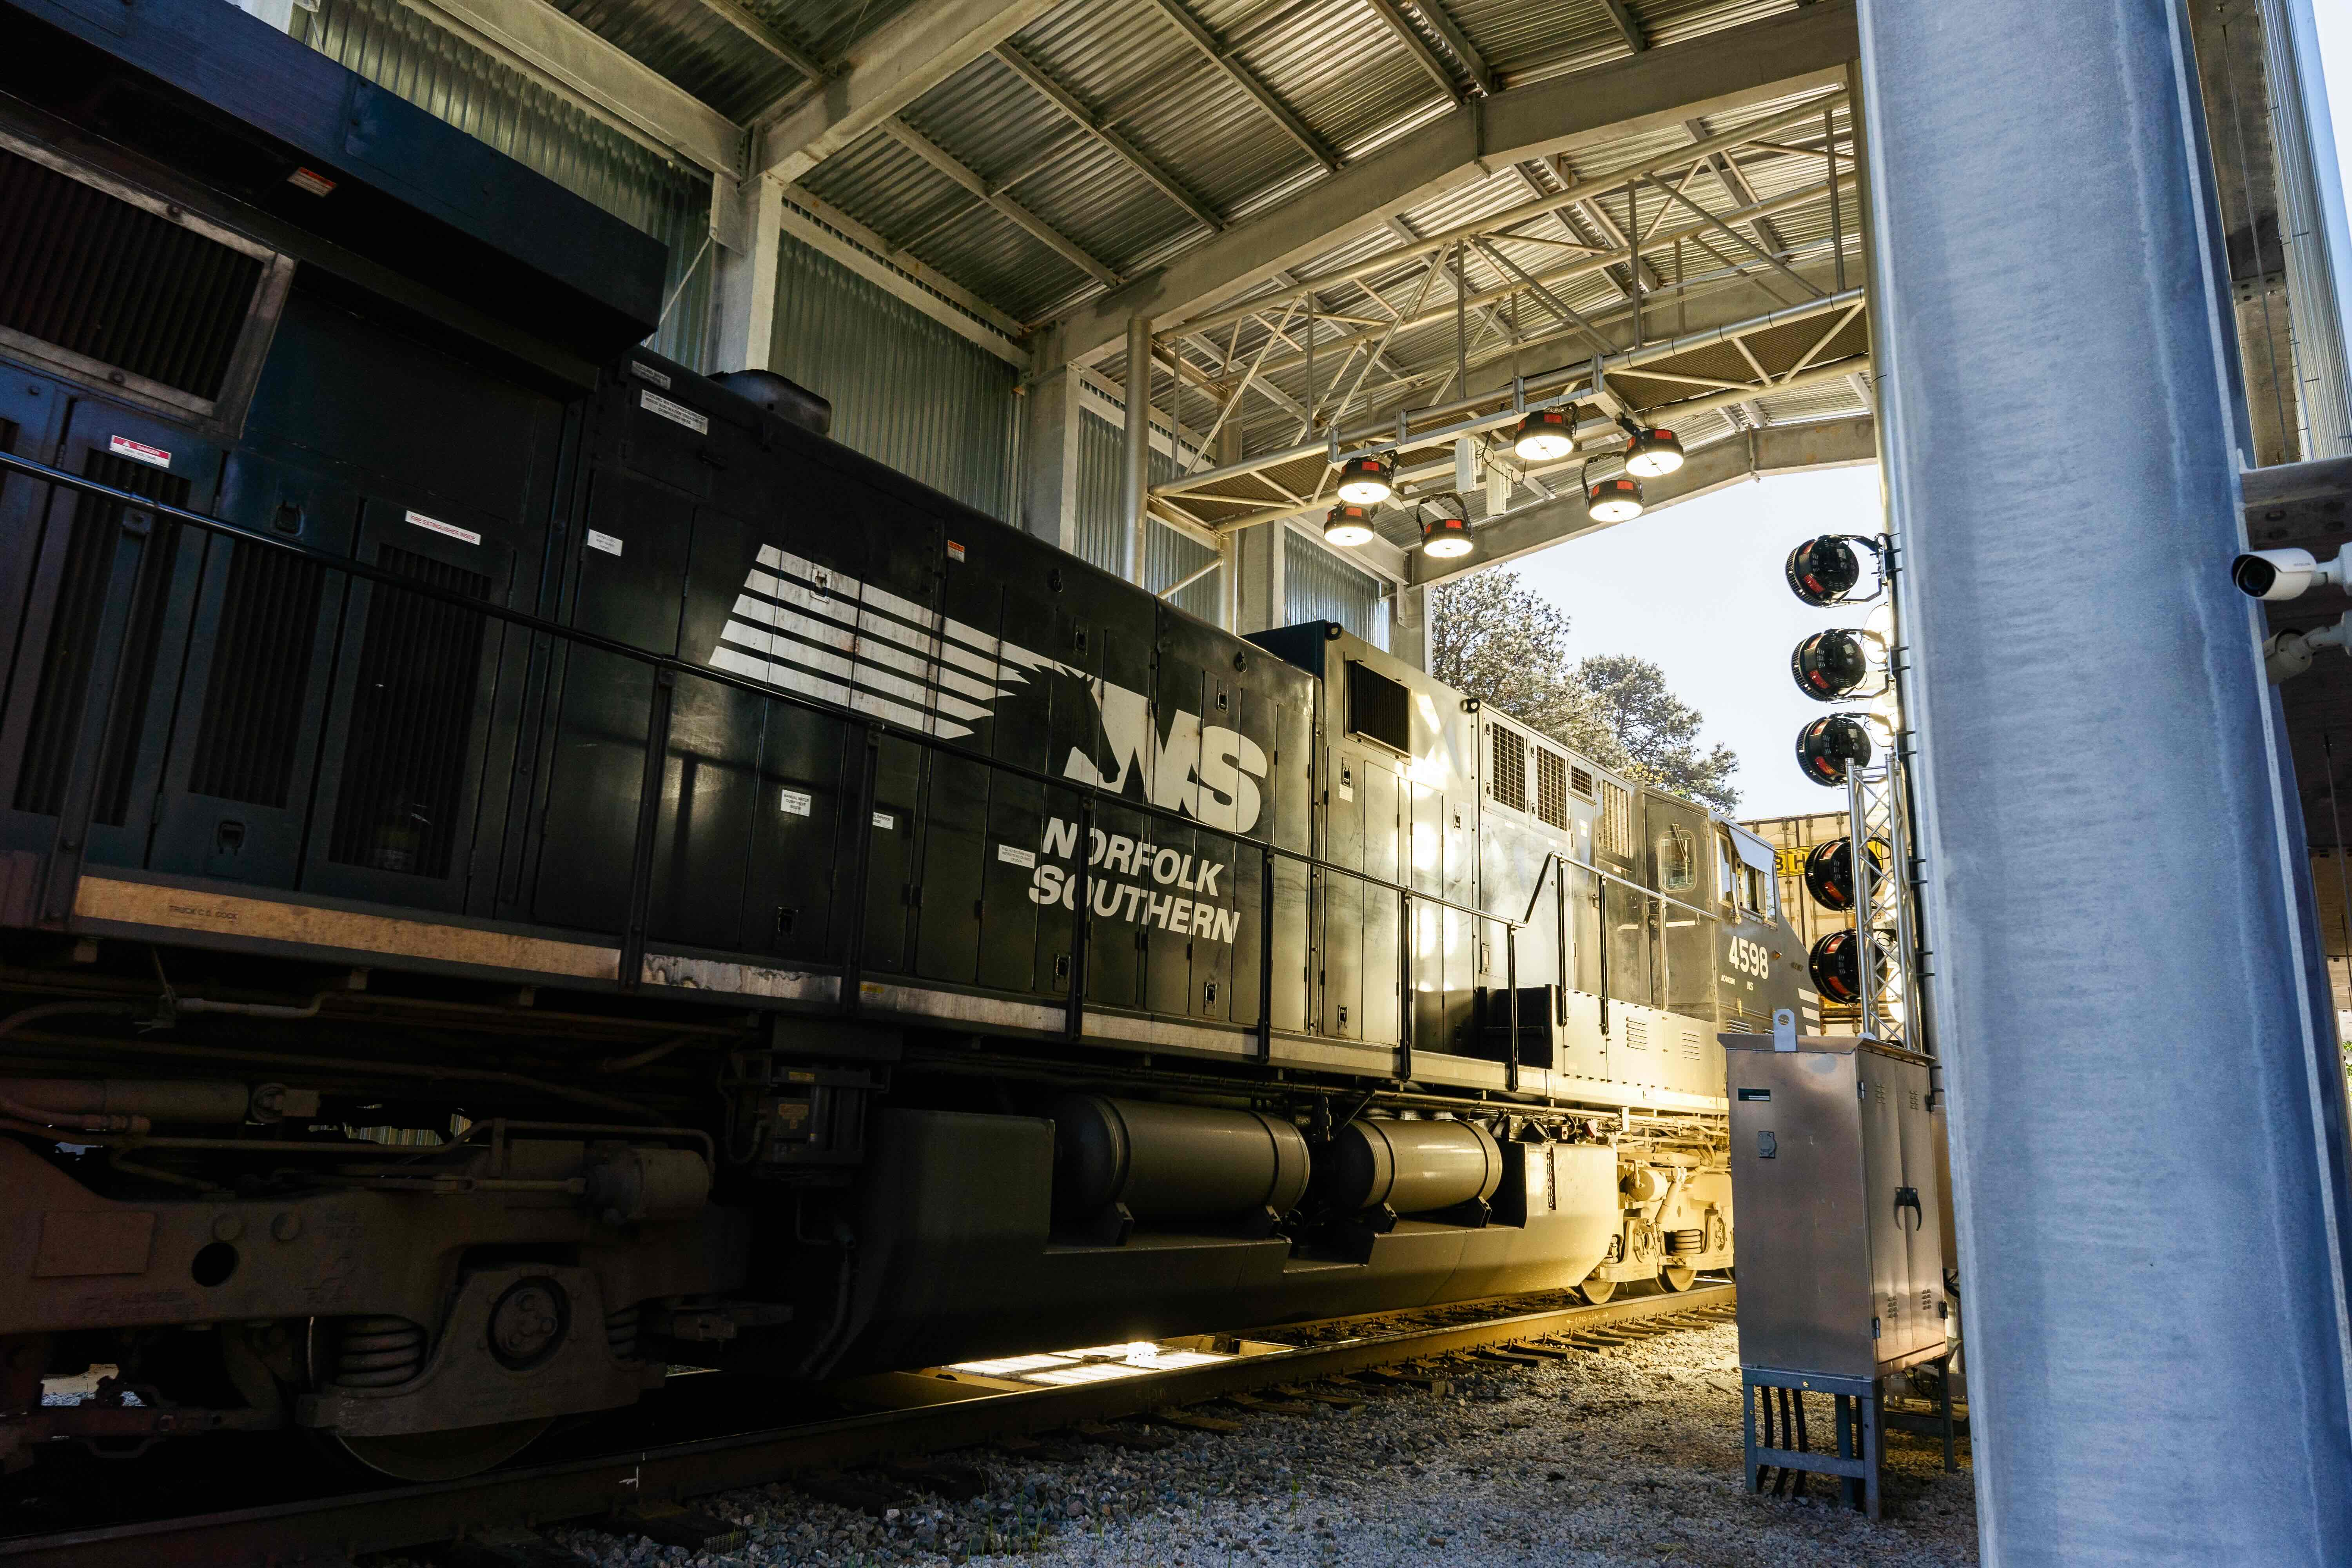 Pictured: Norfolk Southern Digital Inspection Portal in Jackson, Georgia